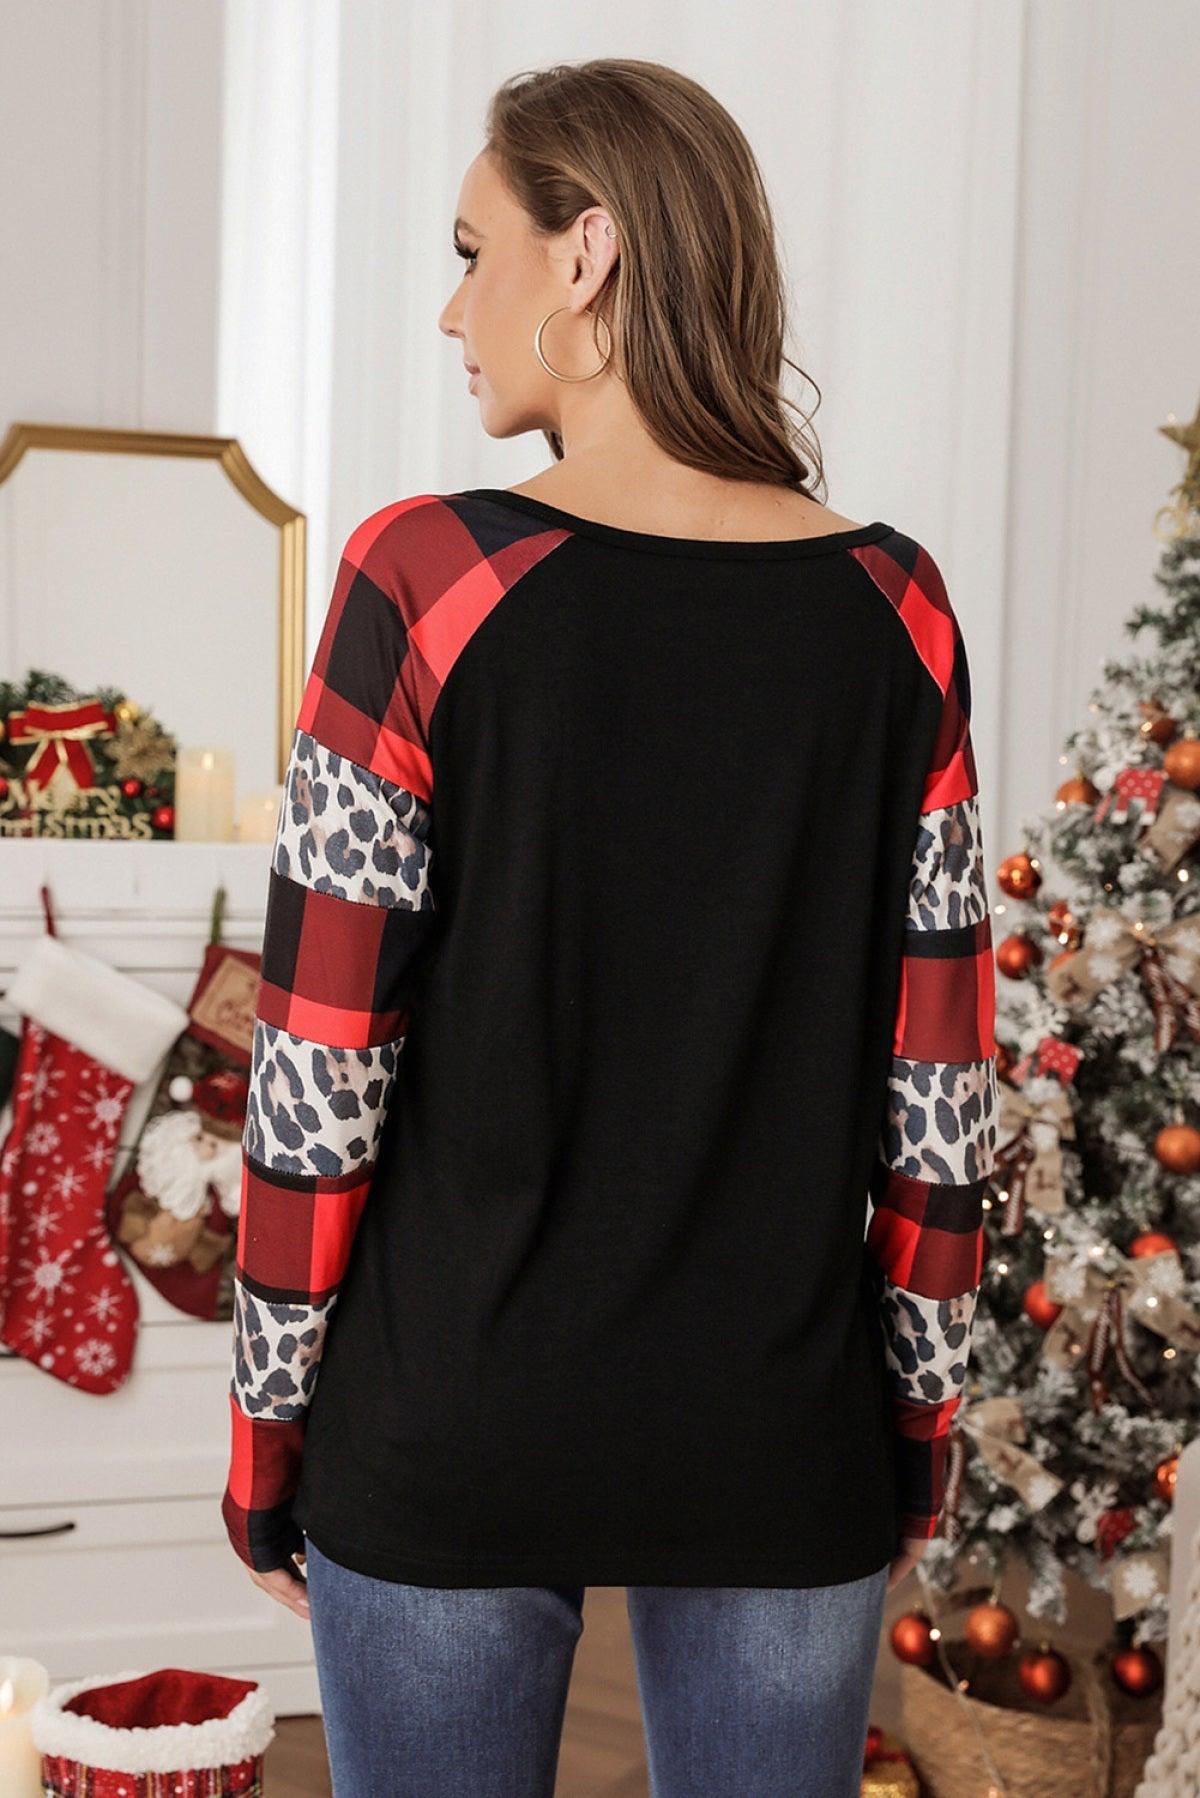 Black Heart Shaped Leopard Plaid Splicing Long Sleeve Top - That’s So Fletch Boutique 